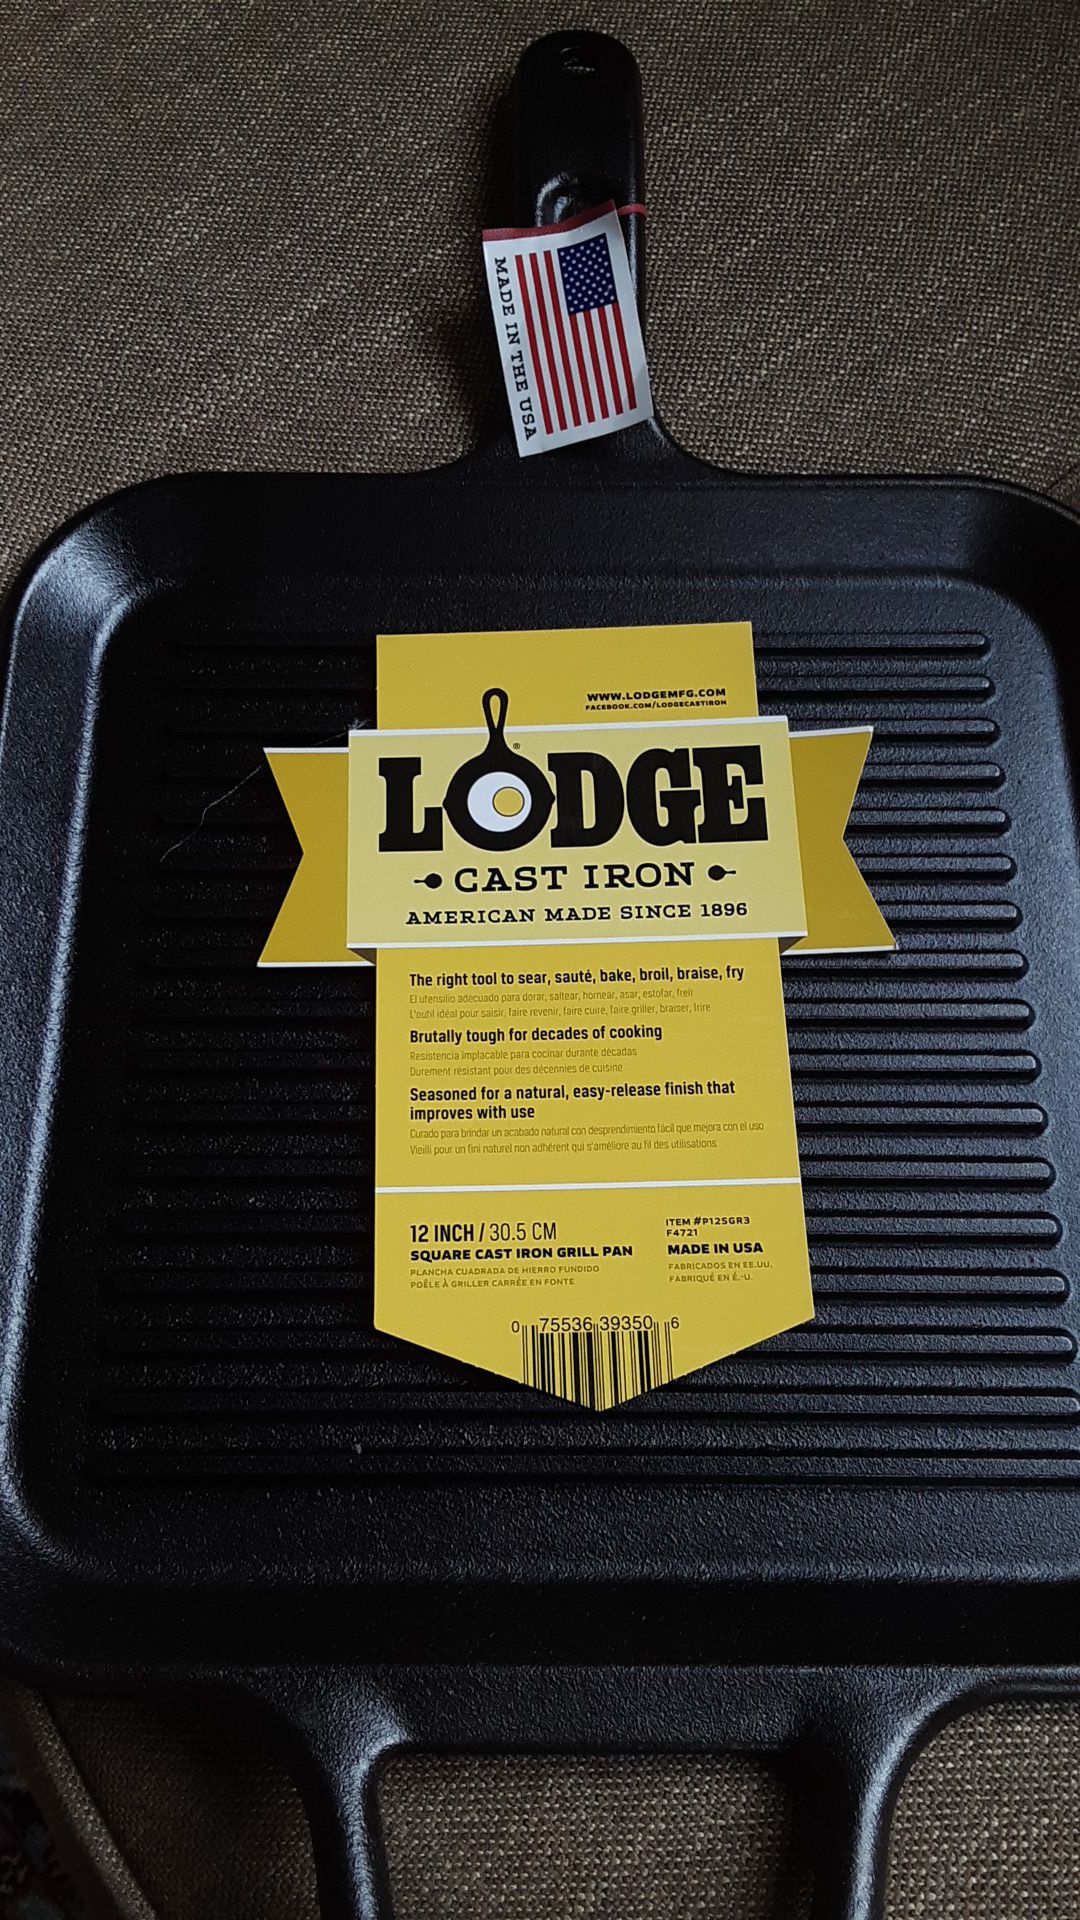 Brand New***Large griddle cast iron pan